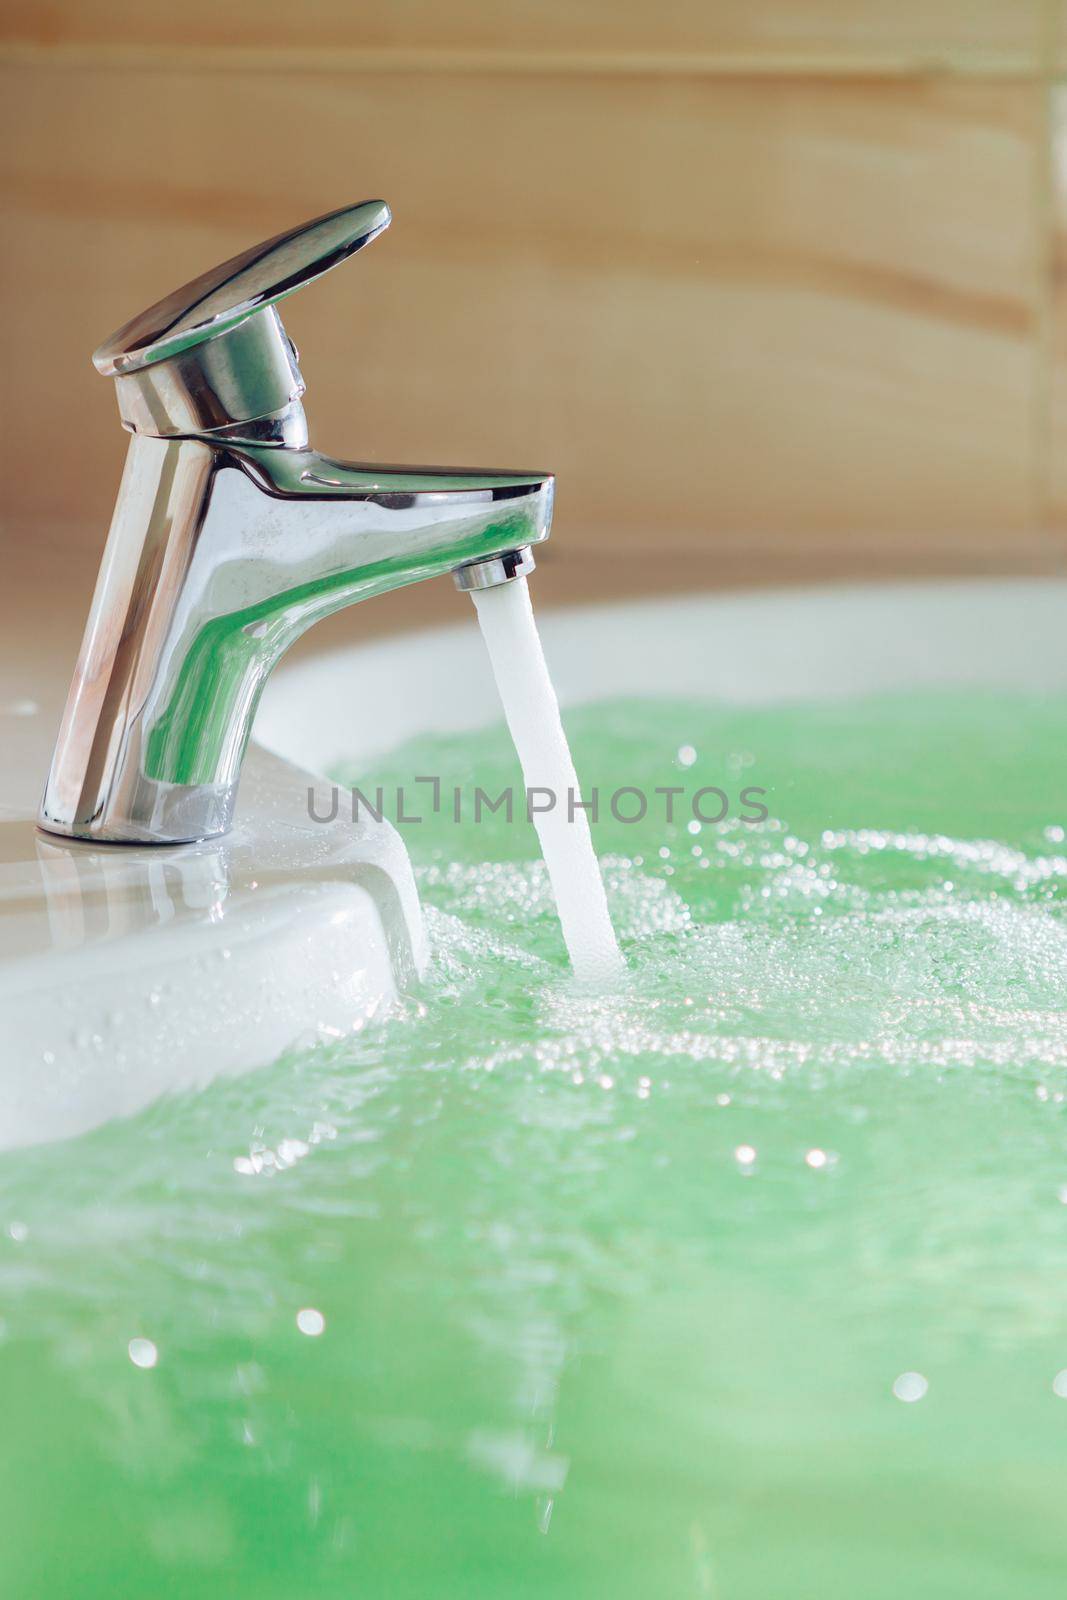 single handle faucet pouring hot water in a bath tub